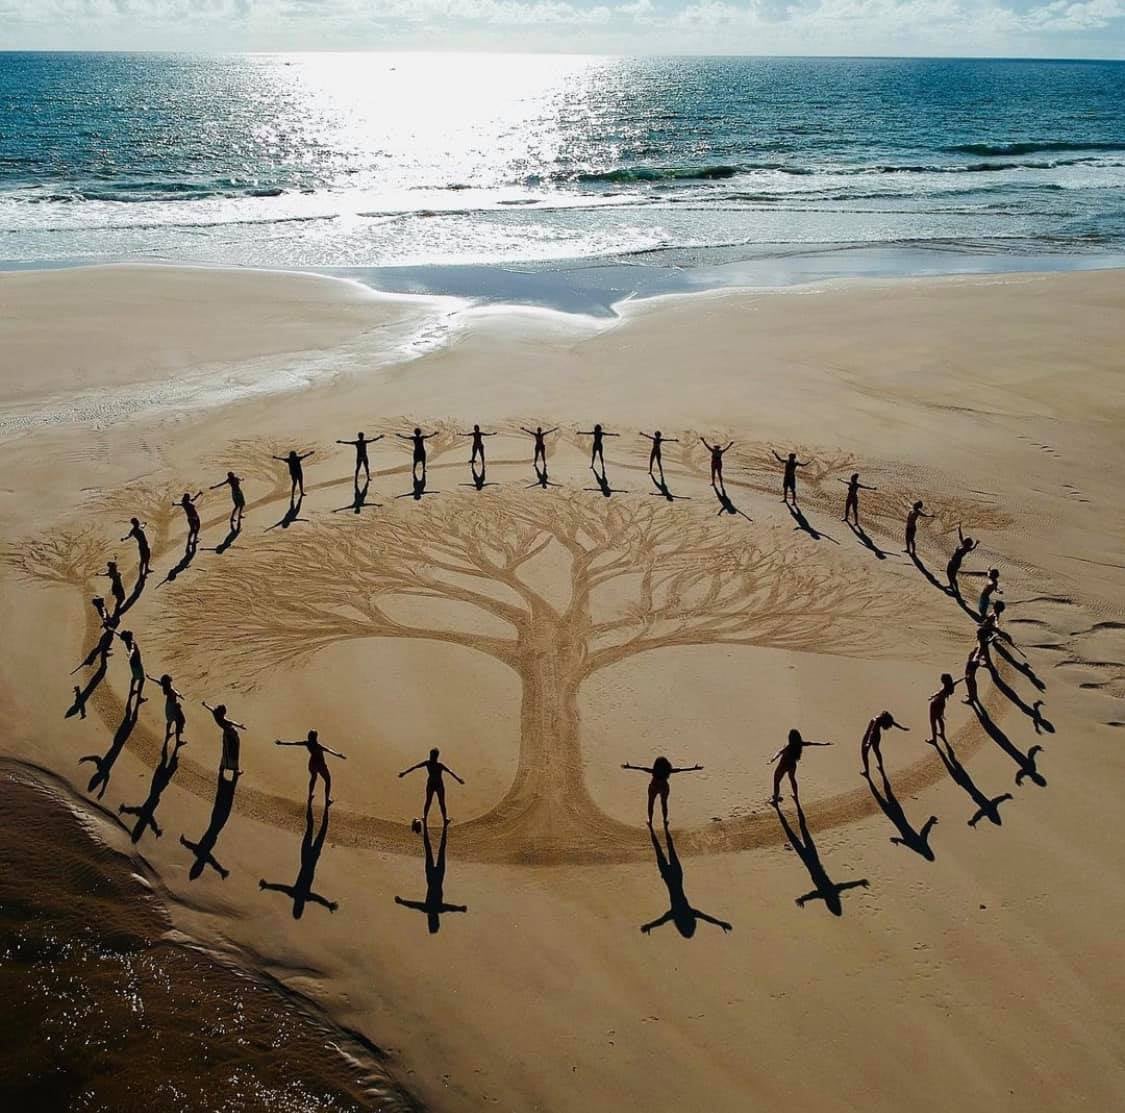 Circle of humans around the image of a tree, drawn on a beach